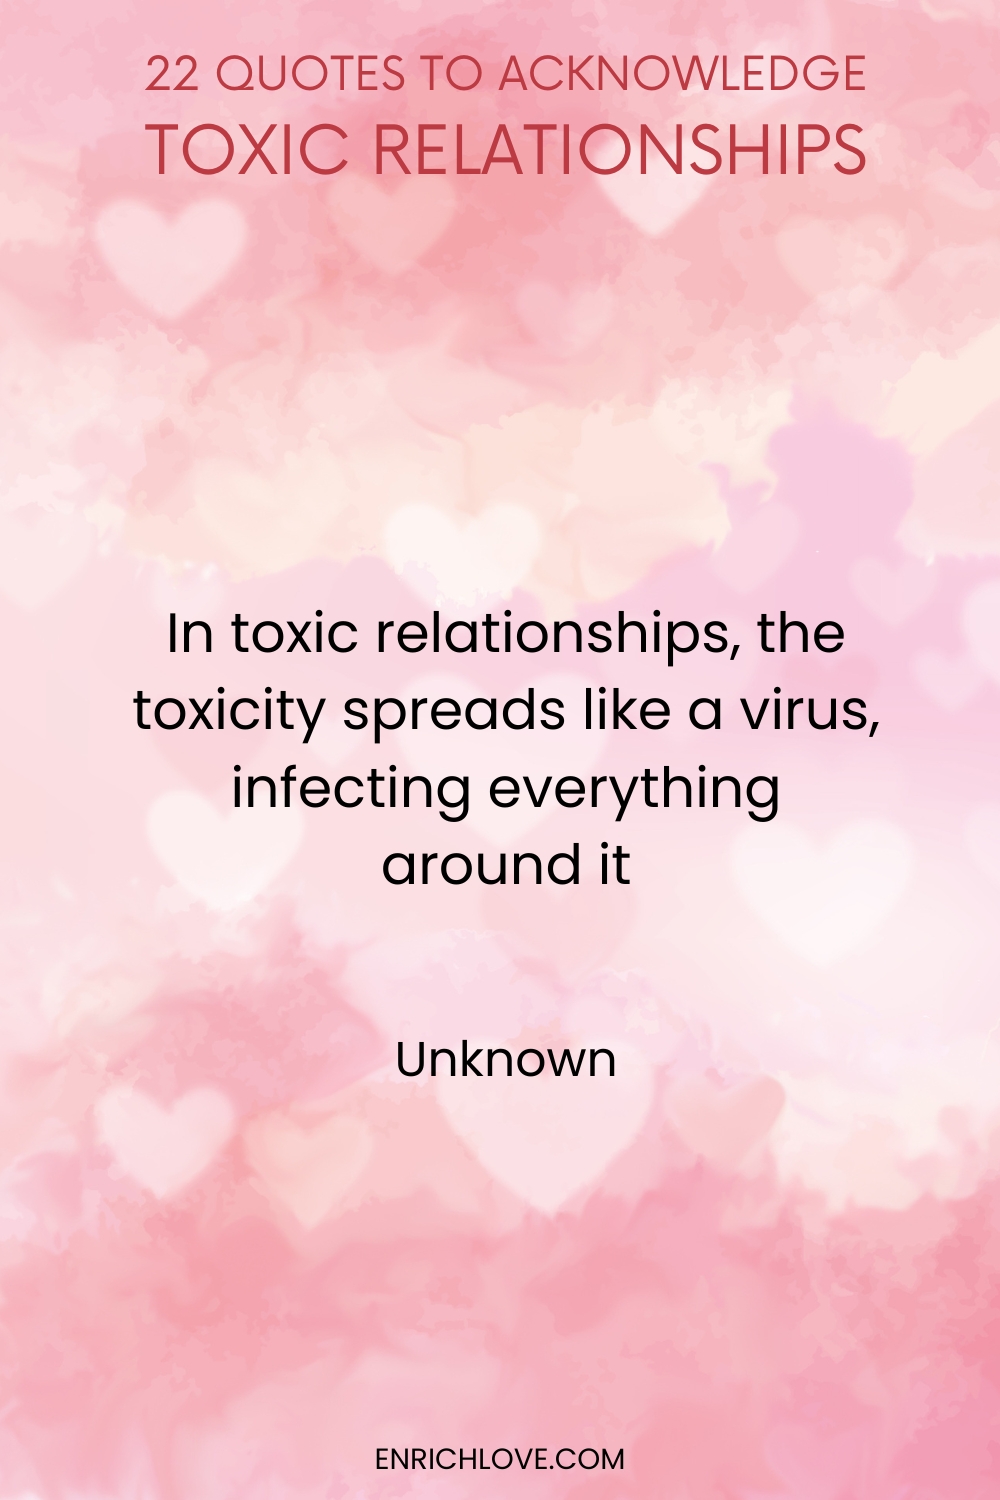 22 Quotes to Acknowledge Toxic Relationships -In toxic relationships, the toxicity spreads like a virus, infecting everything around it by Unknown